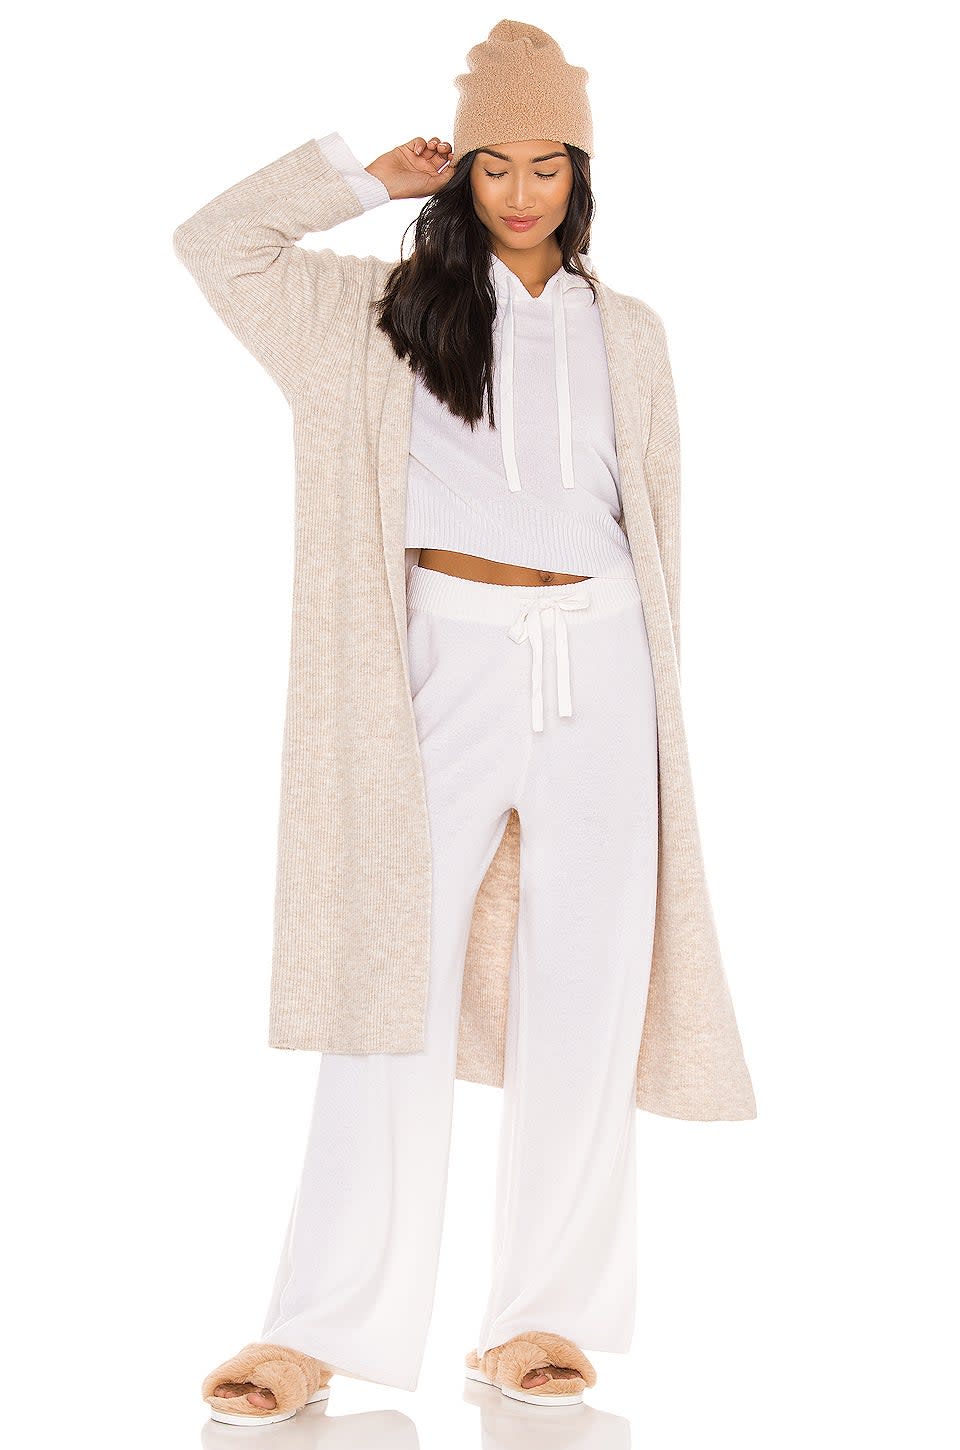 <h2>Bella Dahl Wide Leg Cashmere Pant</h2><br>If you’re looking to swoosh fabulously around your living quarters swaddled in cashmere, this snow-white, ultra-wide-legged pair of sweatpants might be just the ticket.<br><br><strong>Bella Dahl</strong> Easy Wide Leg Pant, $, available at <a href="https://go.skimresources.com/?id=30283X879131&url=https%3A%2F%2Fwww.revolve.com%2Fbella-dahl-easy-wide-leg-pant-in-pearl-white%2Fdp%2FBLD-WP90%2F%3Fd%3DWomens%26page%3D1%26product%3DBLD-WP90%26bneEl%3Dfalse%26" rel="nofollow noopener" target="_blank" data-ylk="slk:Revolve" class="link ">Revolve</a>